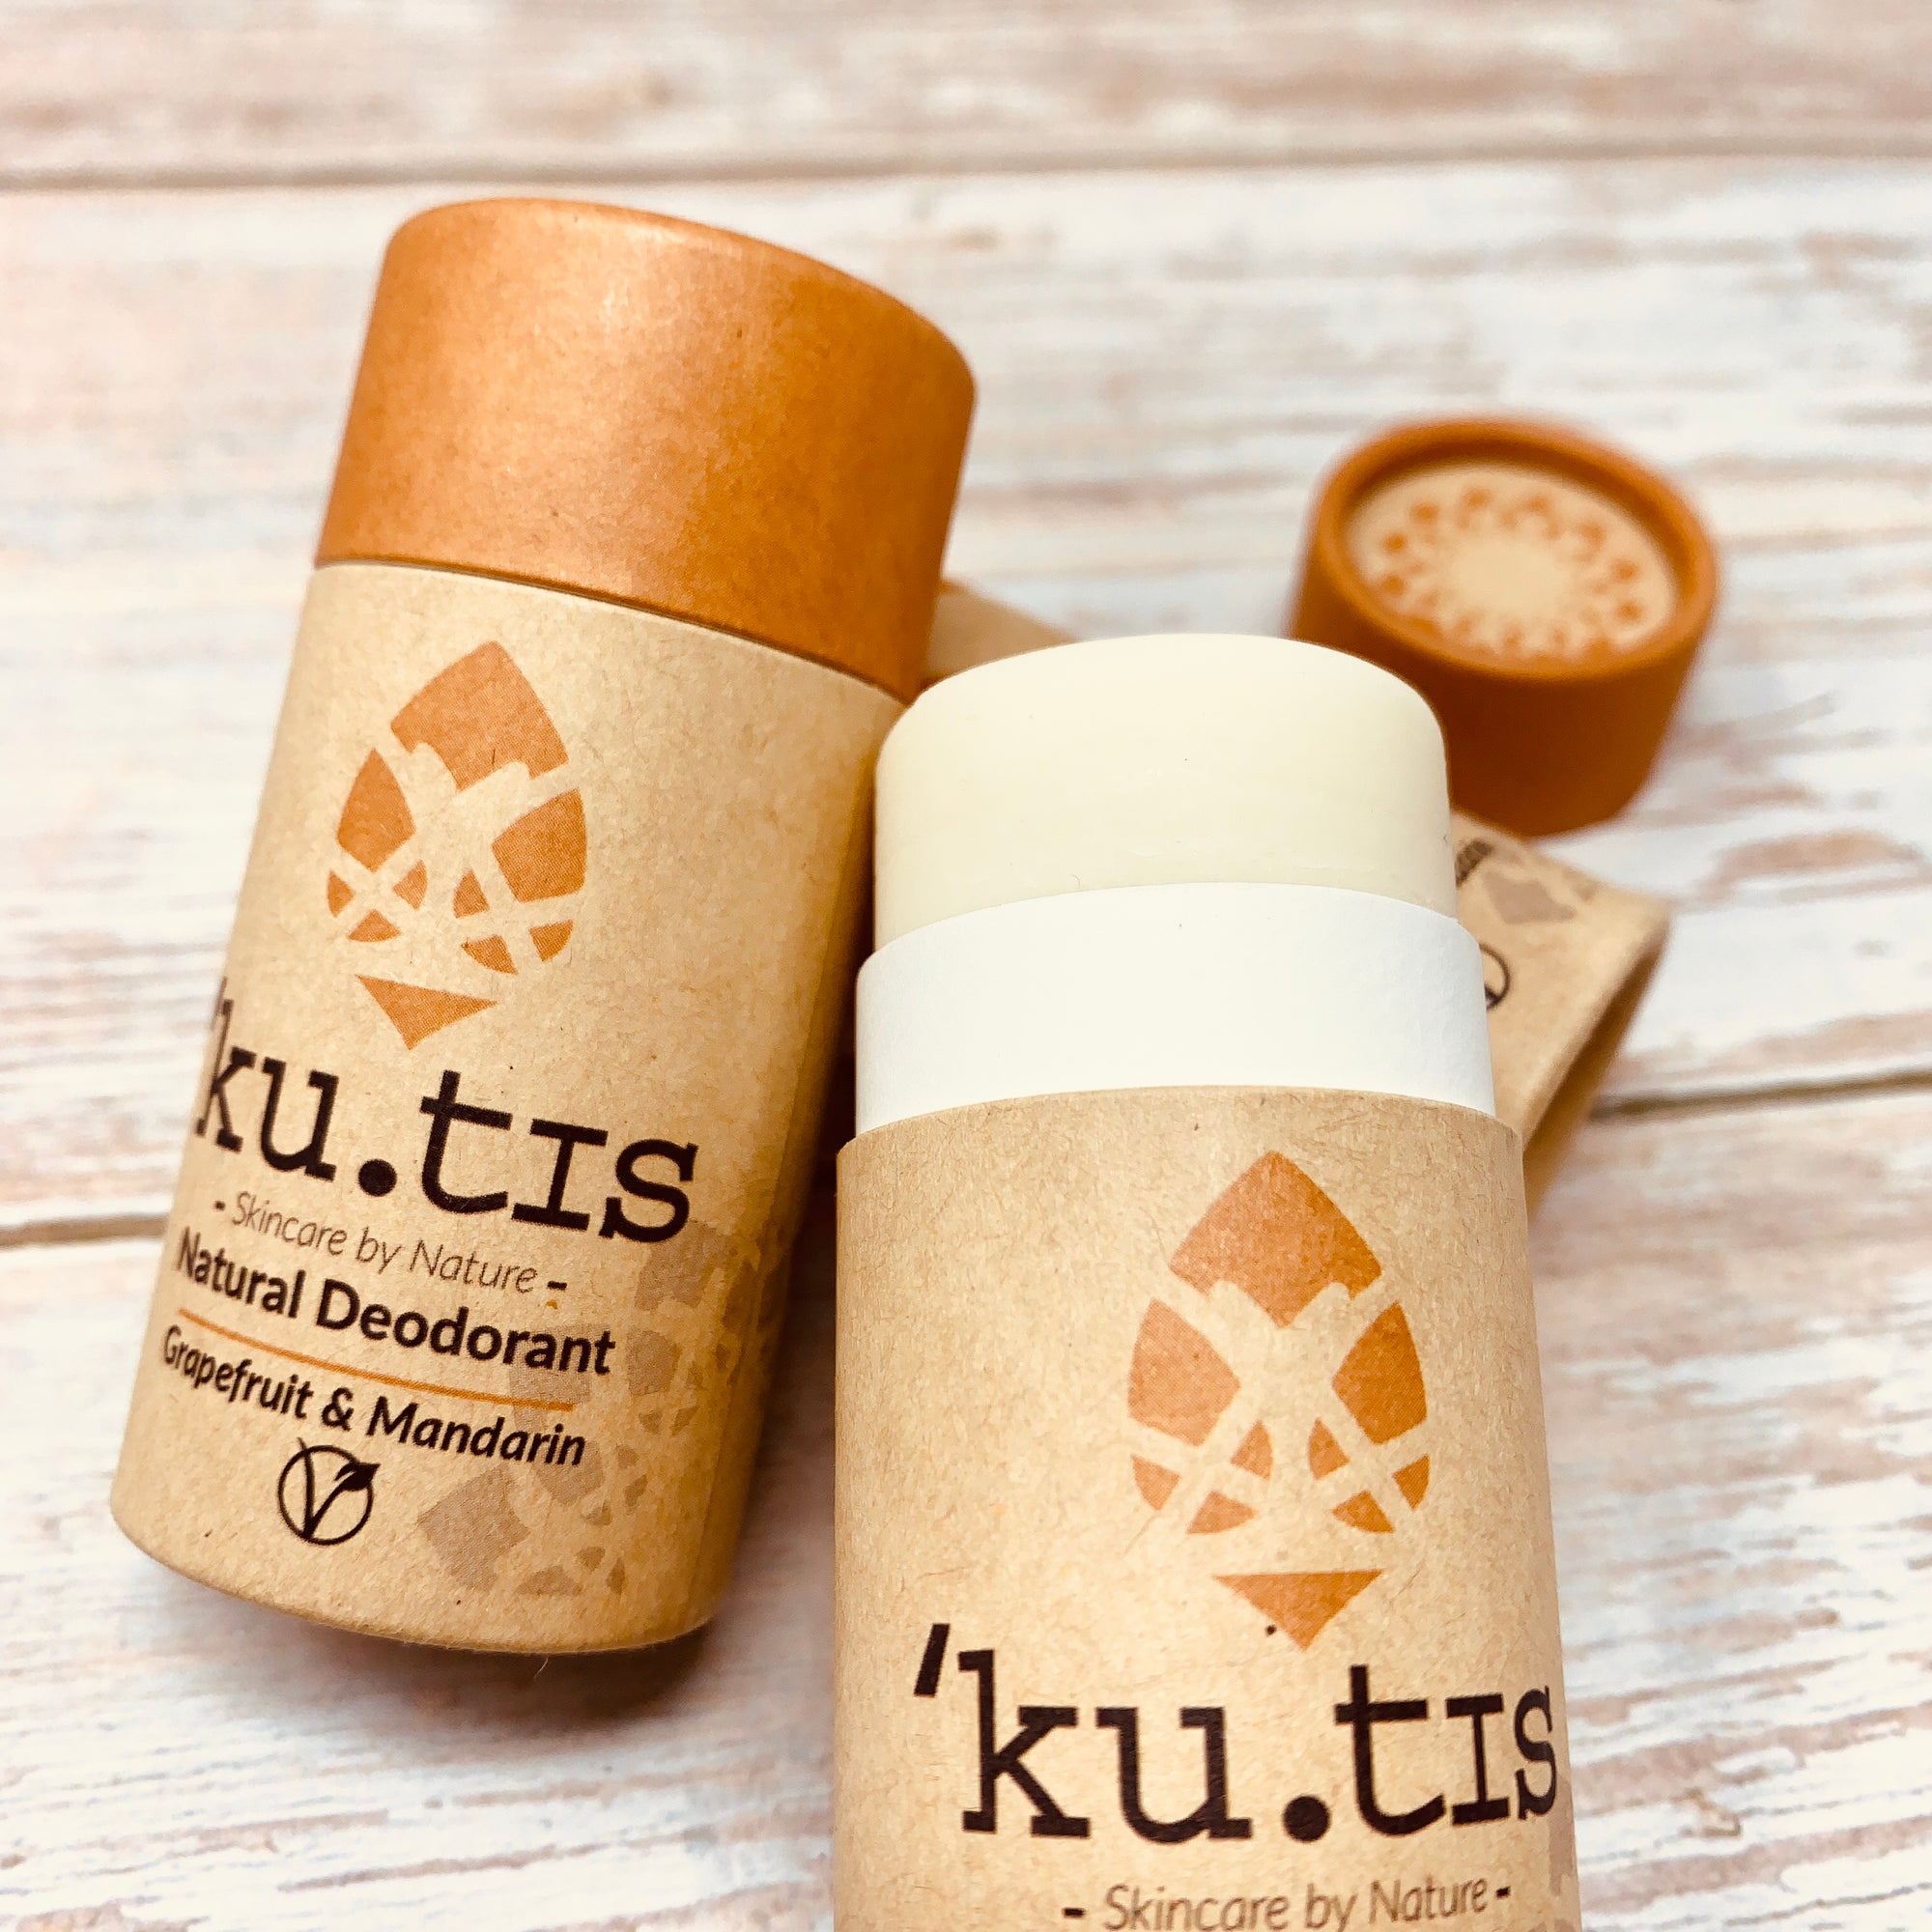 kutis vegan deodorant in a cardboard tube with orange cap, one deodorant is open to show the inside white stick